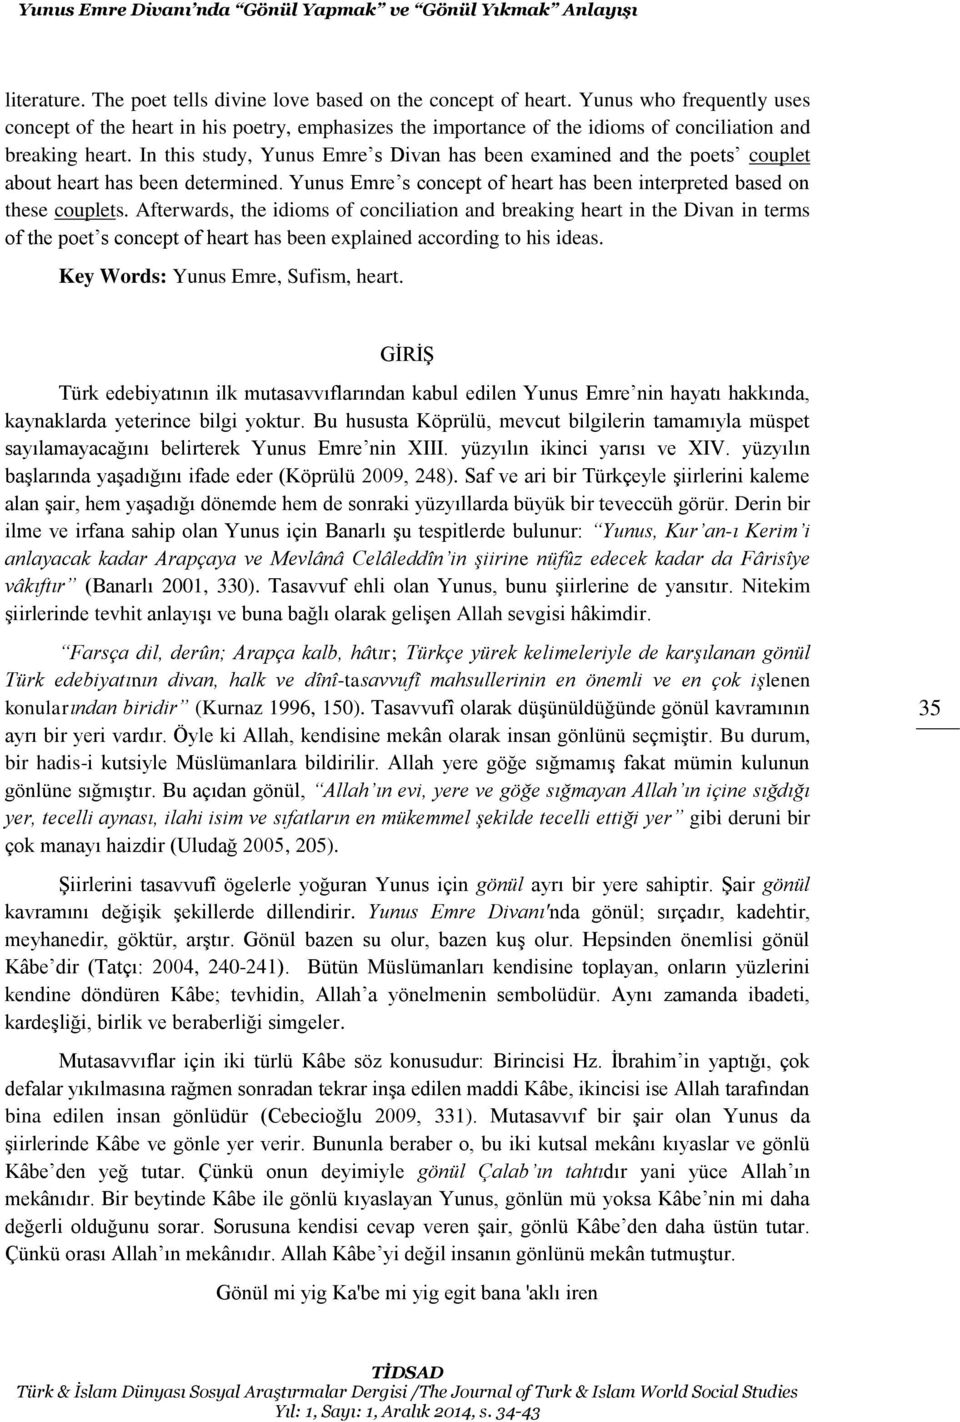 In this study, Yunus Emre s Divan has been examined and the poets couplet about heart has been determined. Yunus Emre s concept of heart has been interpreted based on these couplets.